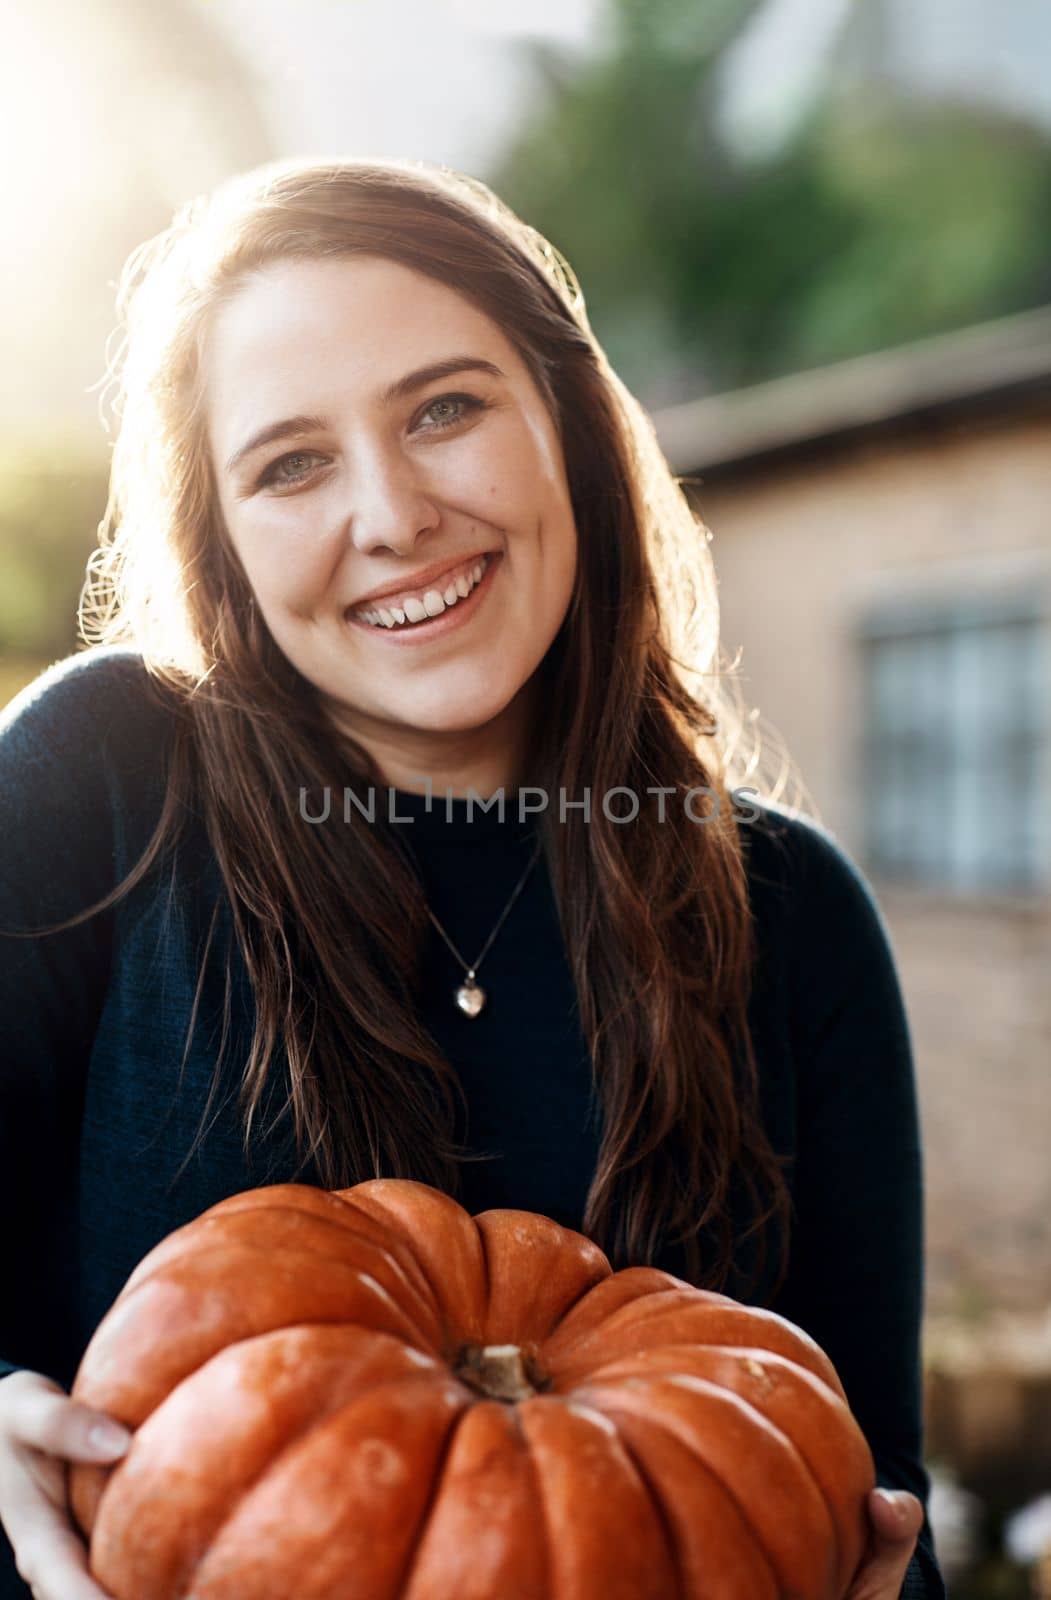 My favourite holiday is coming. Cropped portrait of an attractive young woman holding a pumpkin outside. by YuriArcurs